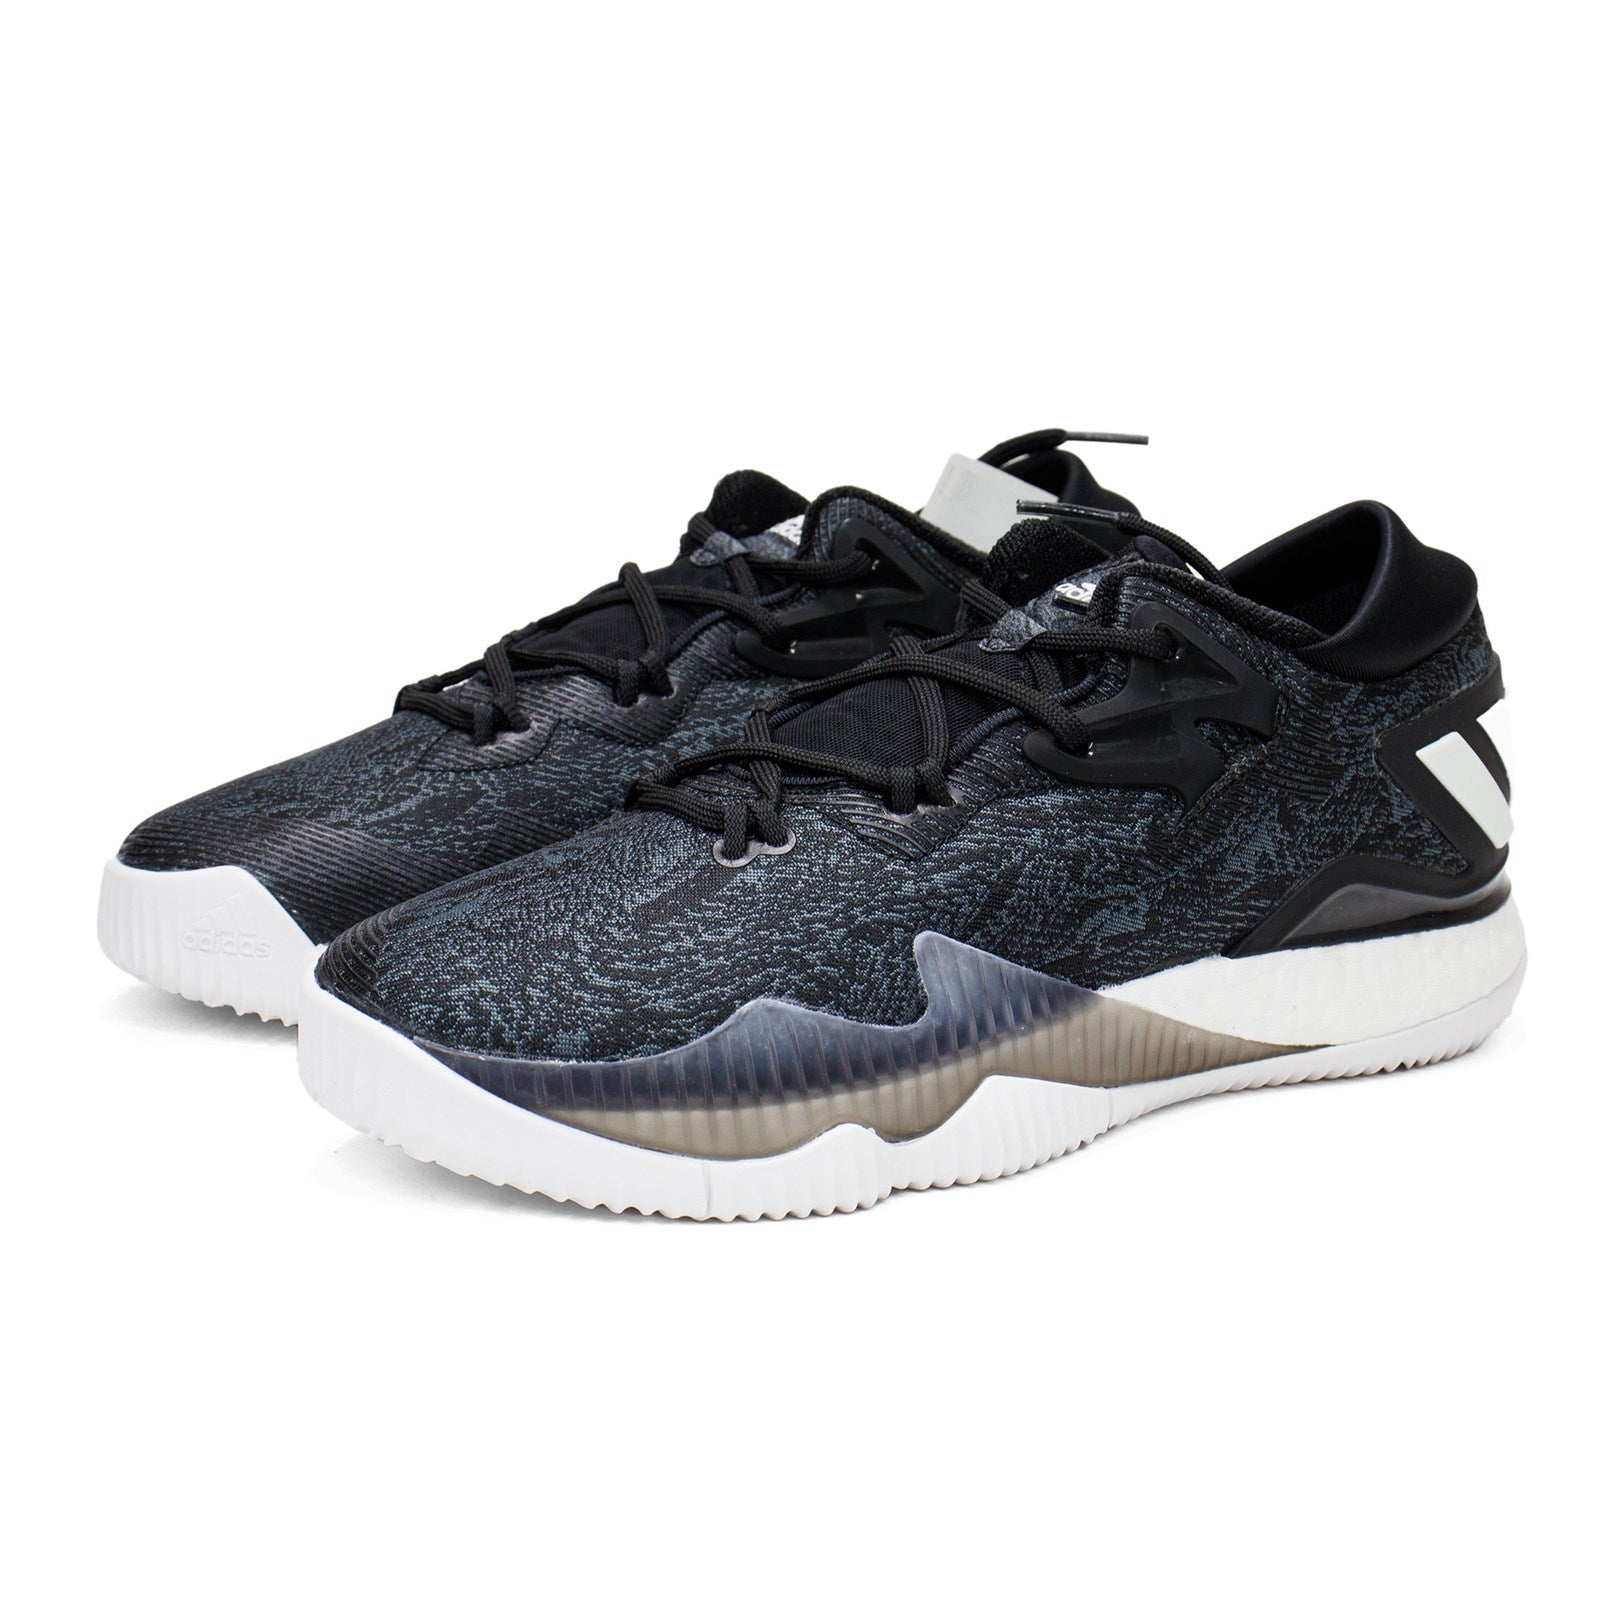 Adidas Men Crazylight Boost Low 2016 Basketball Shoes